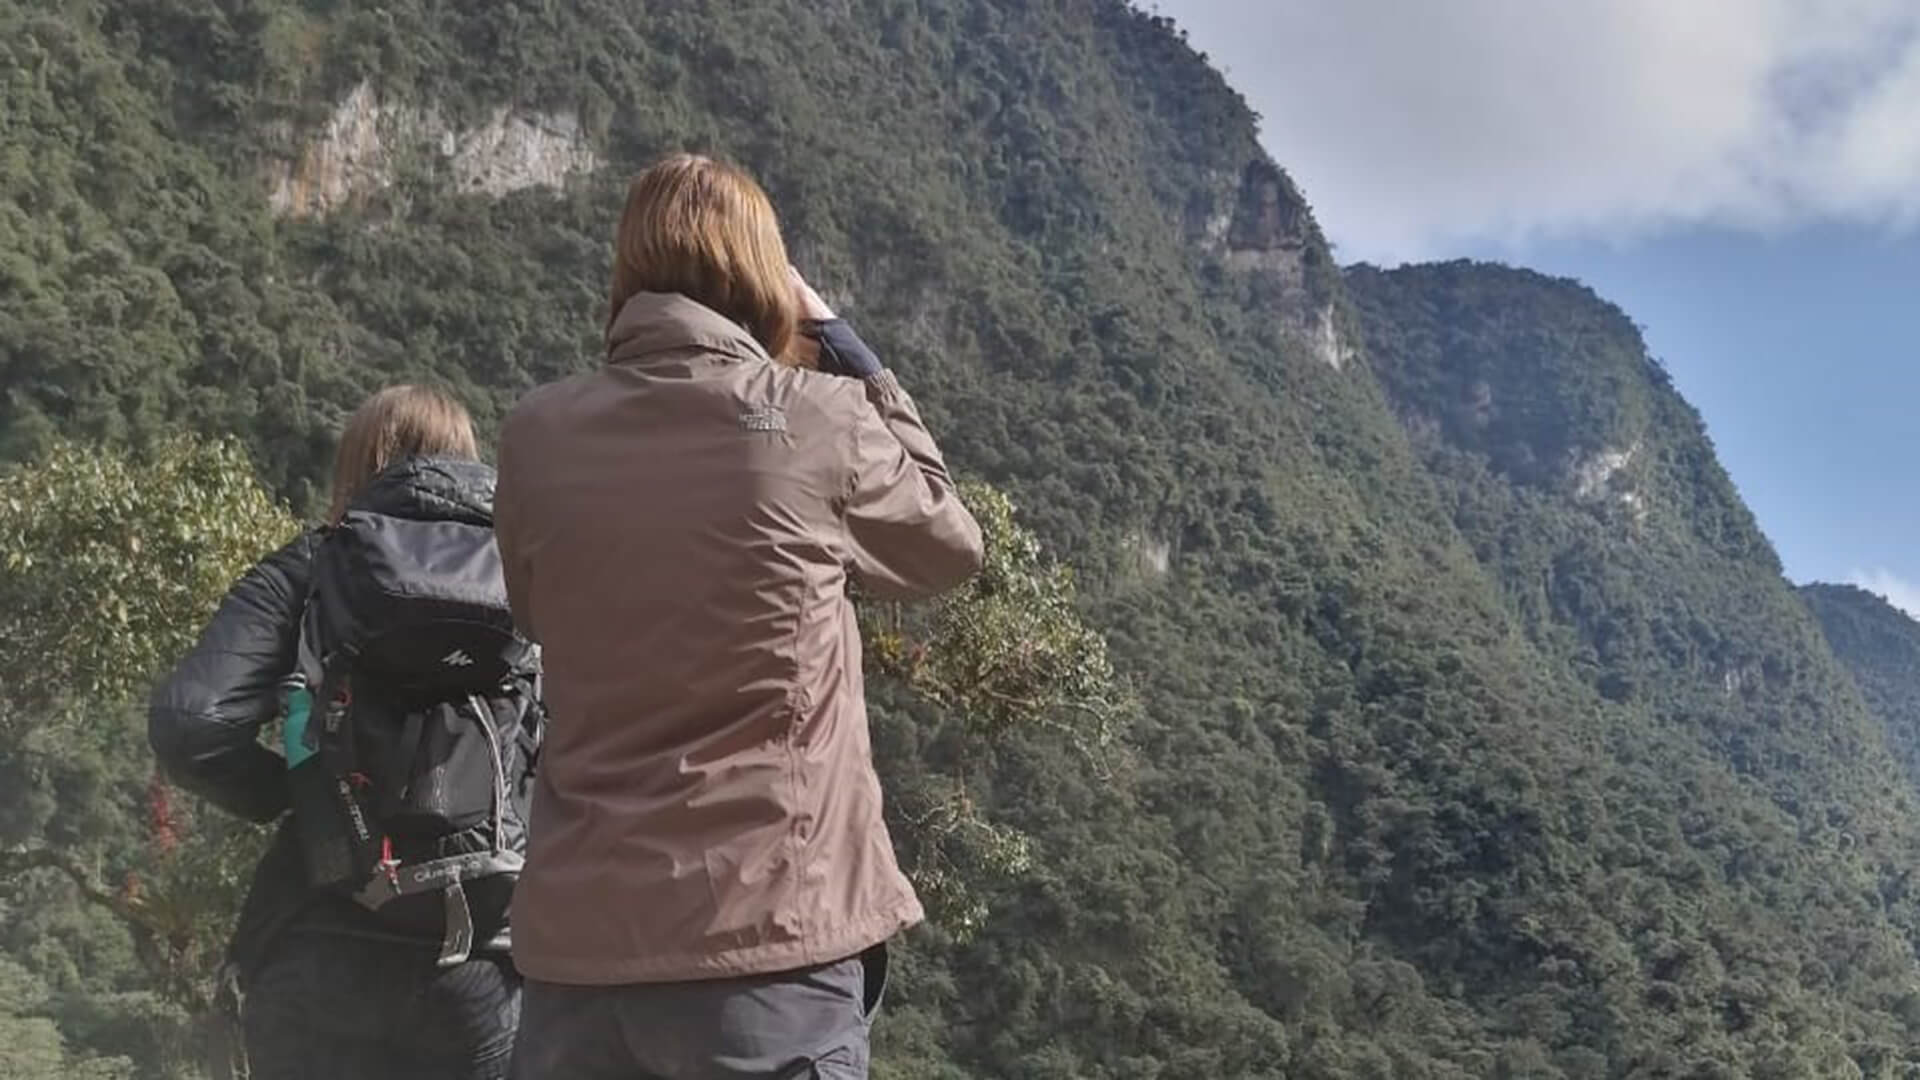 Two female travelers in the mountainous forest surroundings of Chachapoyas